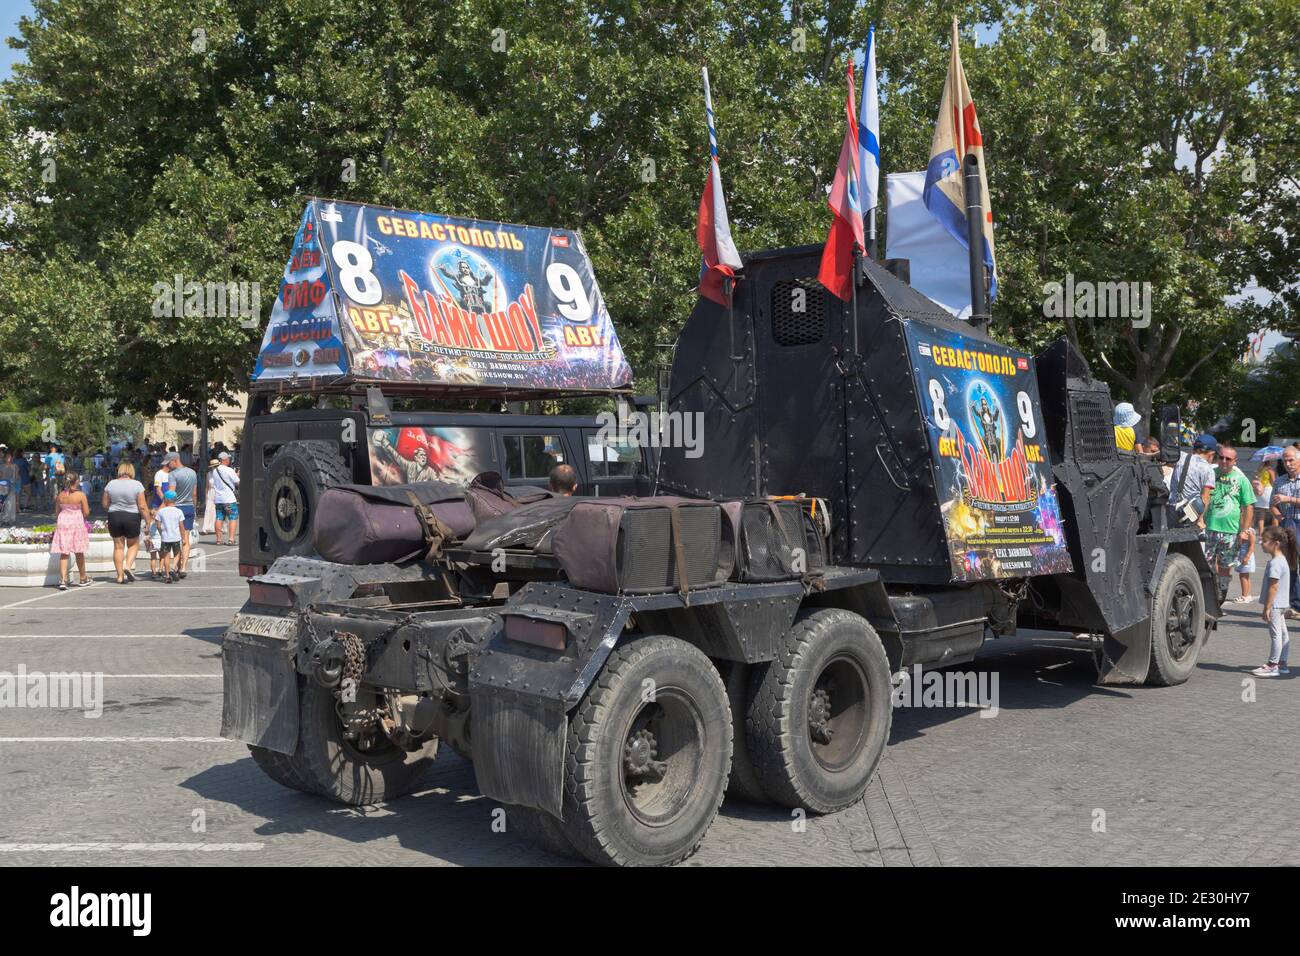 Sevastopol, Crimea, Russia - July 26, 2020: Cars of the bike club Night Wolves with advertising for the show Collapse of Babylon on Nakhimov Square in Stock Photo